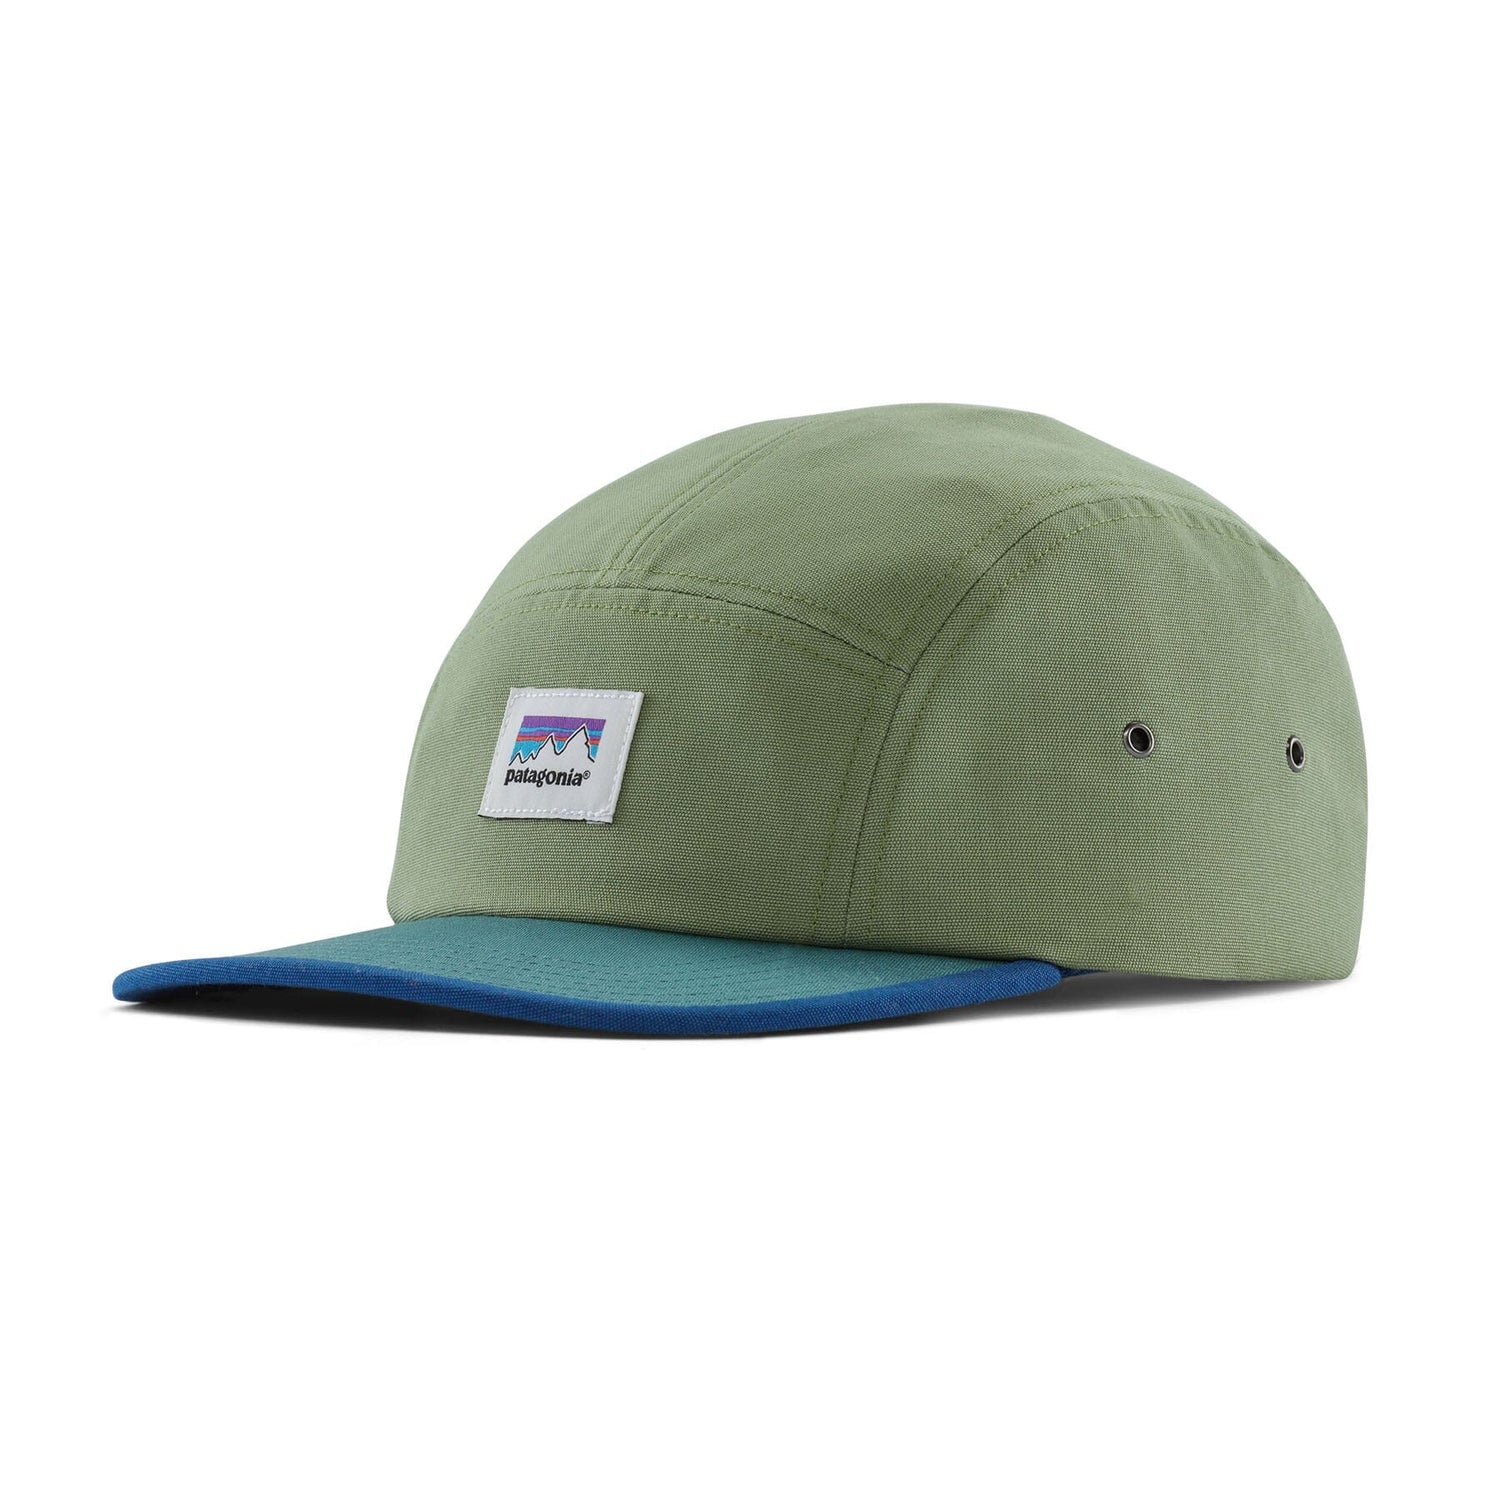 Patagonia Graphic Maclure Hat - Organic Cotton & recycled polyester Shop Sticker: Matcha Green ALL Headwear